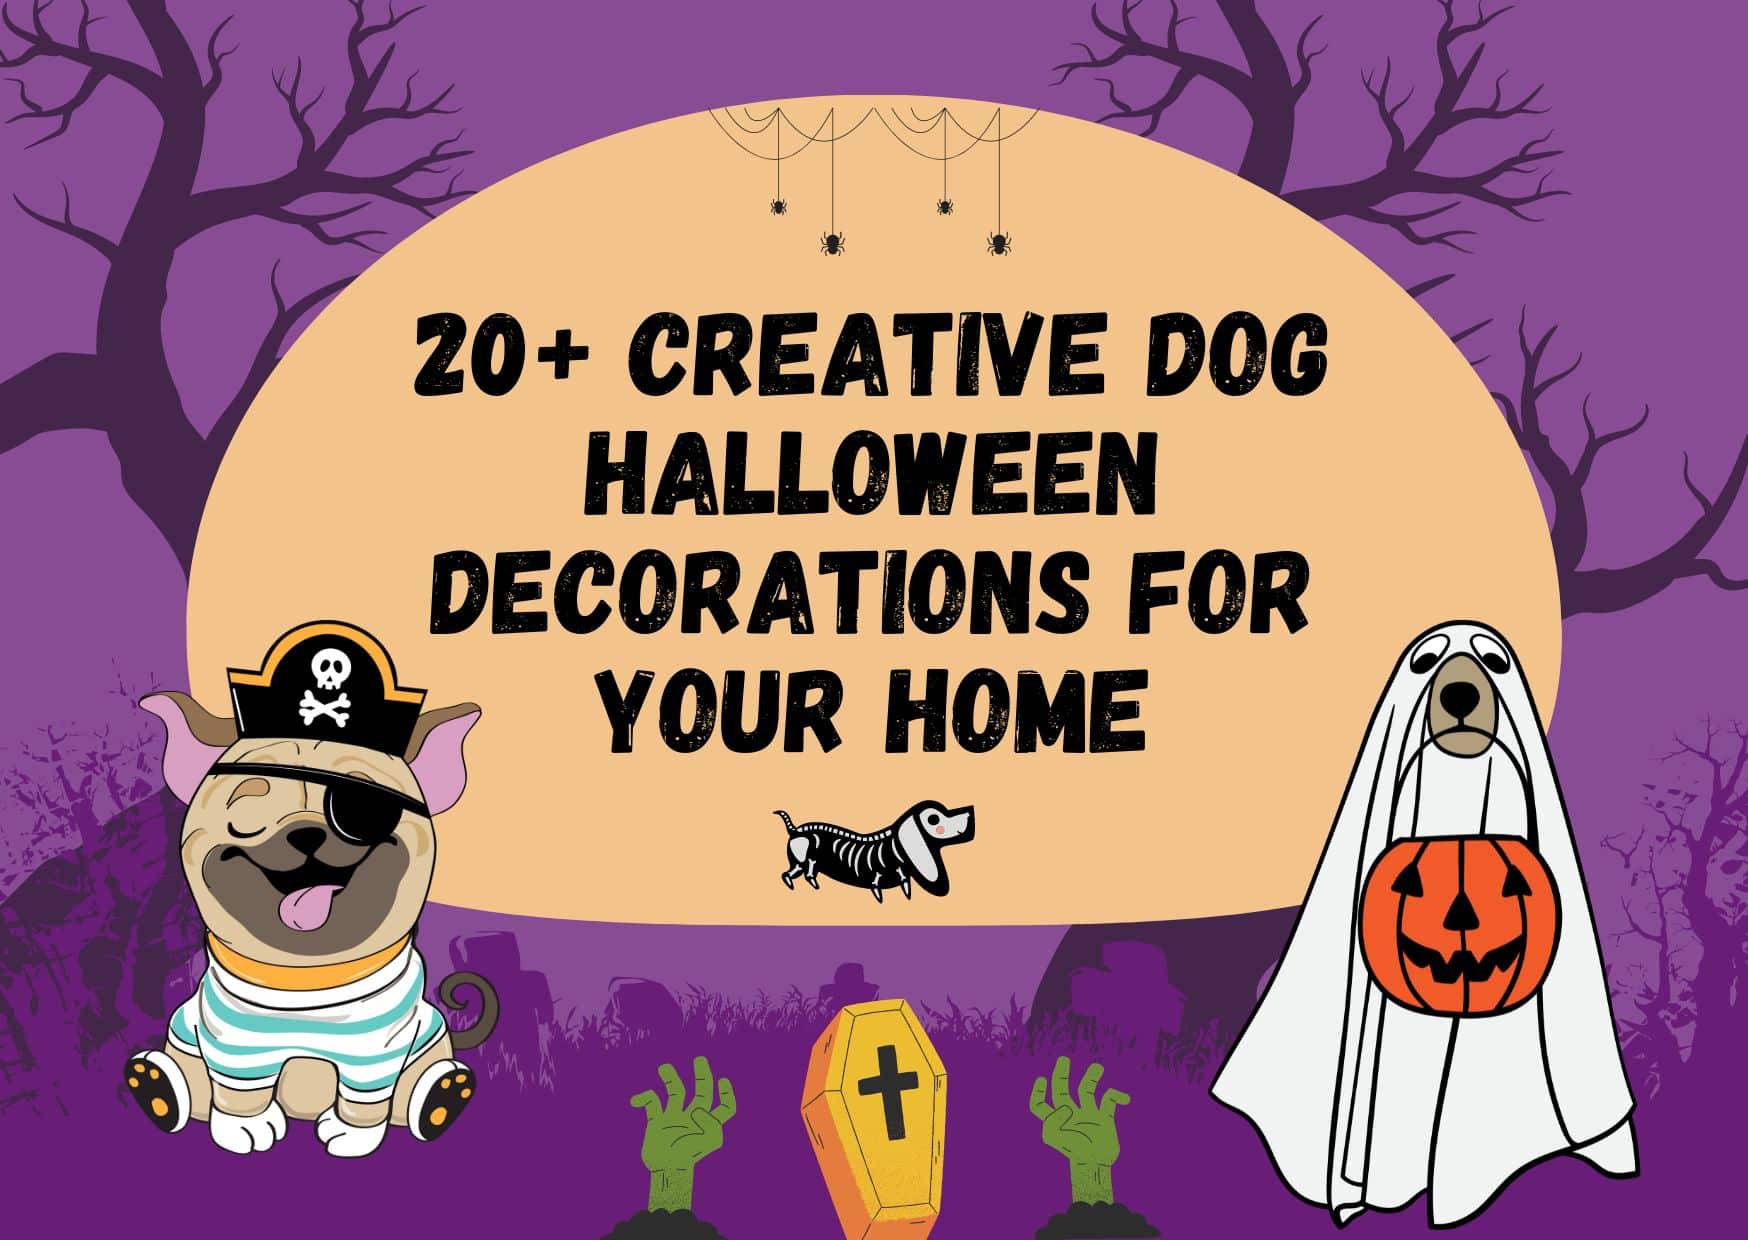 20+ Creative and Cute Dog Halloween Decorations for Your Home